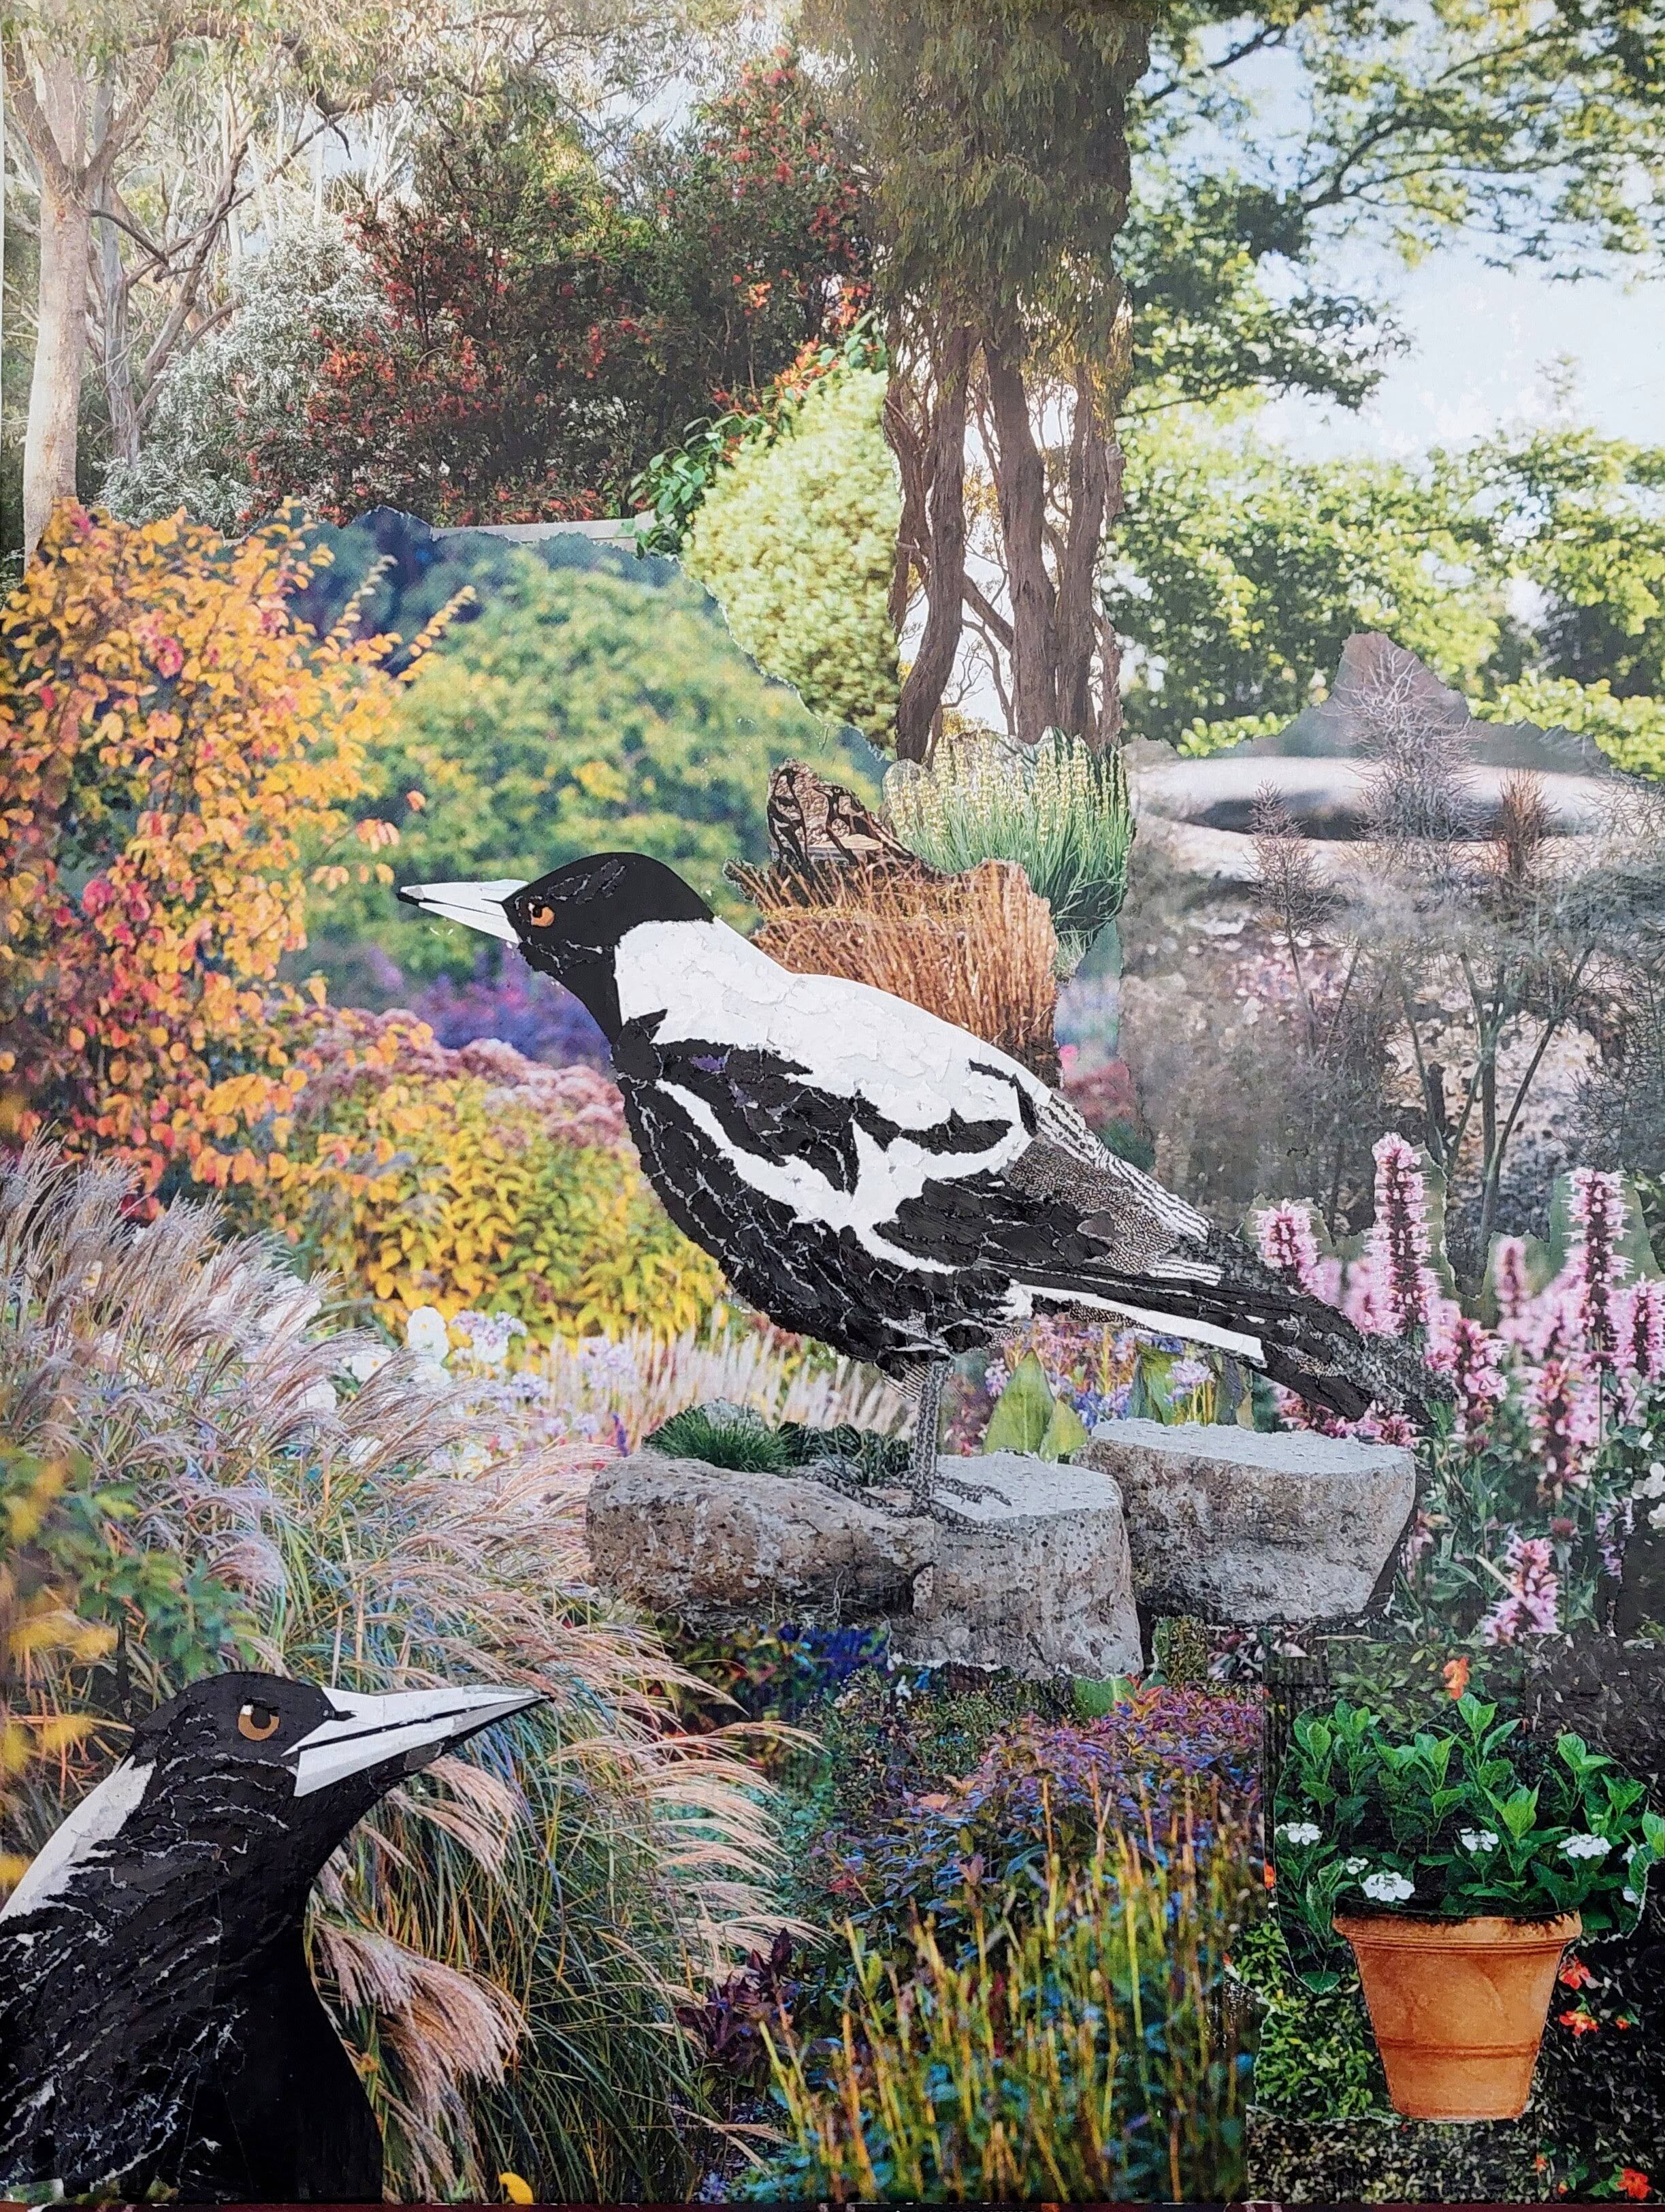 Magpies at the window Gallery Image